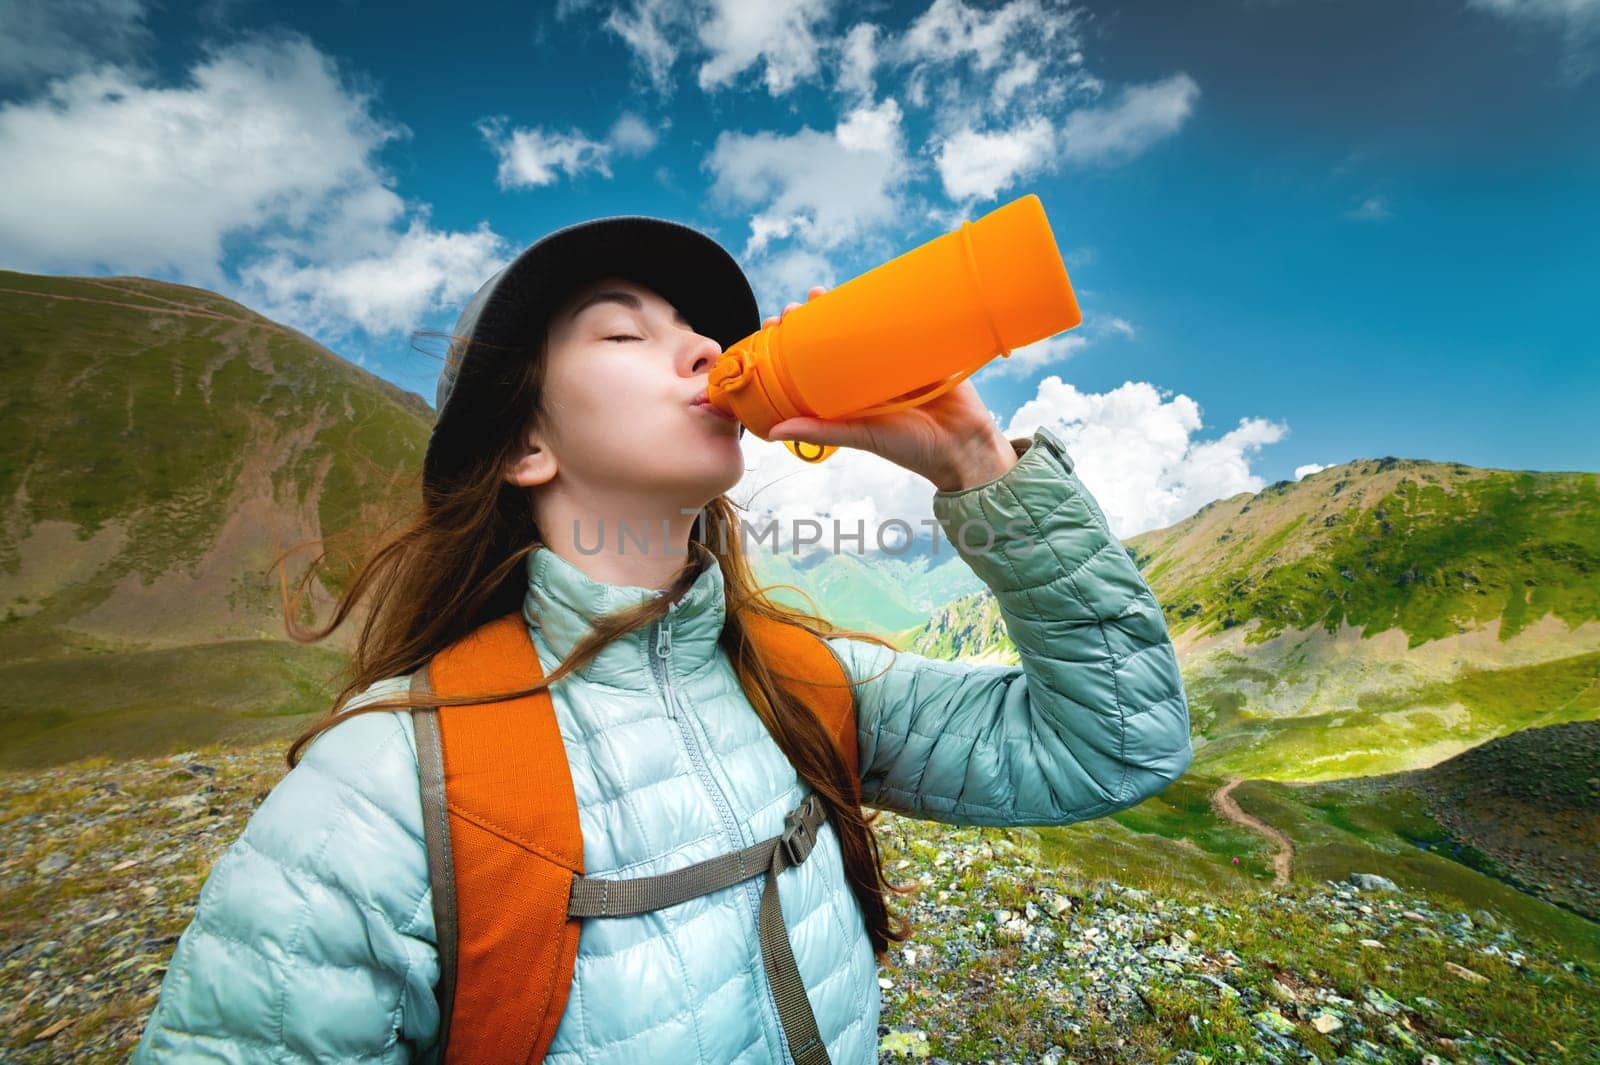 sporty caucasian female tourist drinking from water bottle in green mountains. Woman tourist with a backpack drinking from a reusable silicone water bottle in nature.